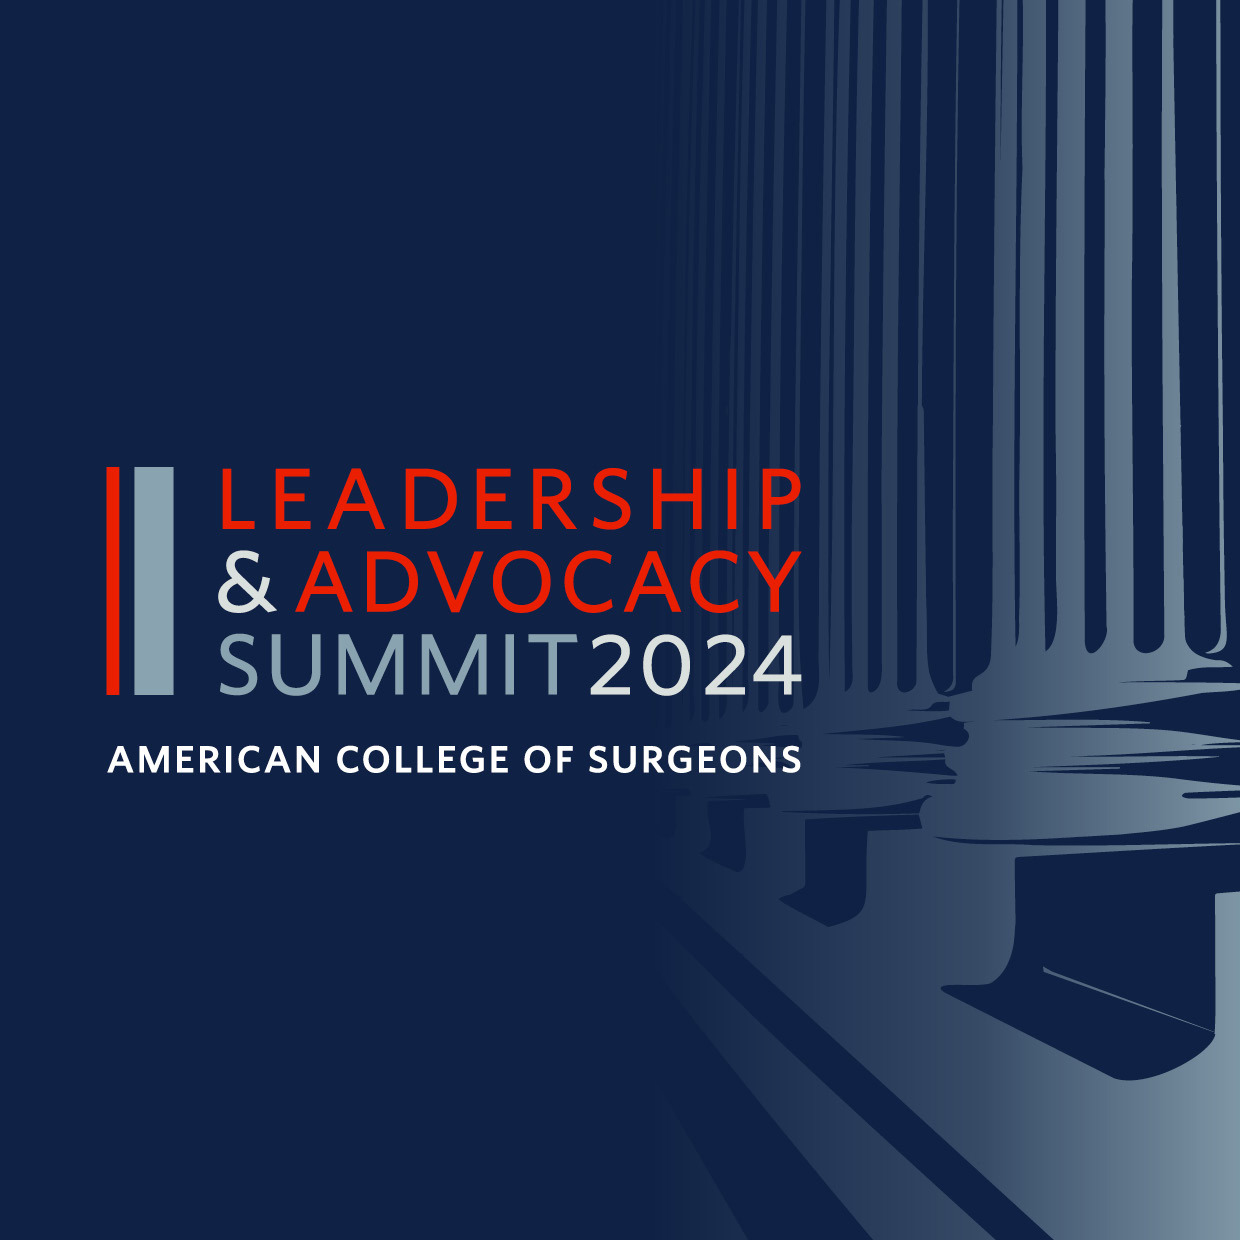 Leadership and Advocacy Summit